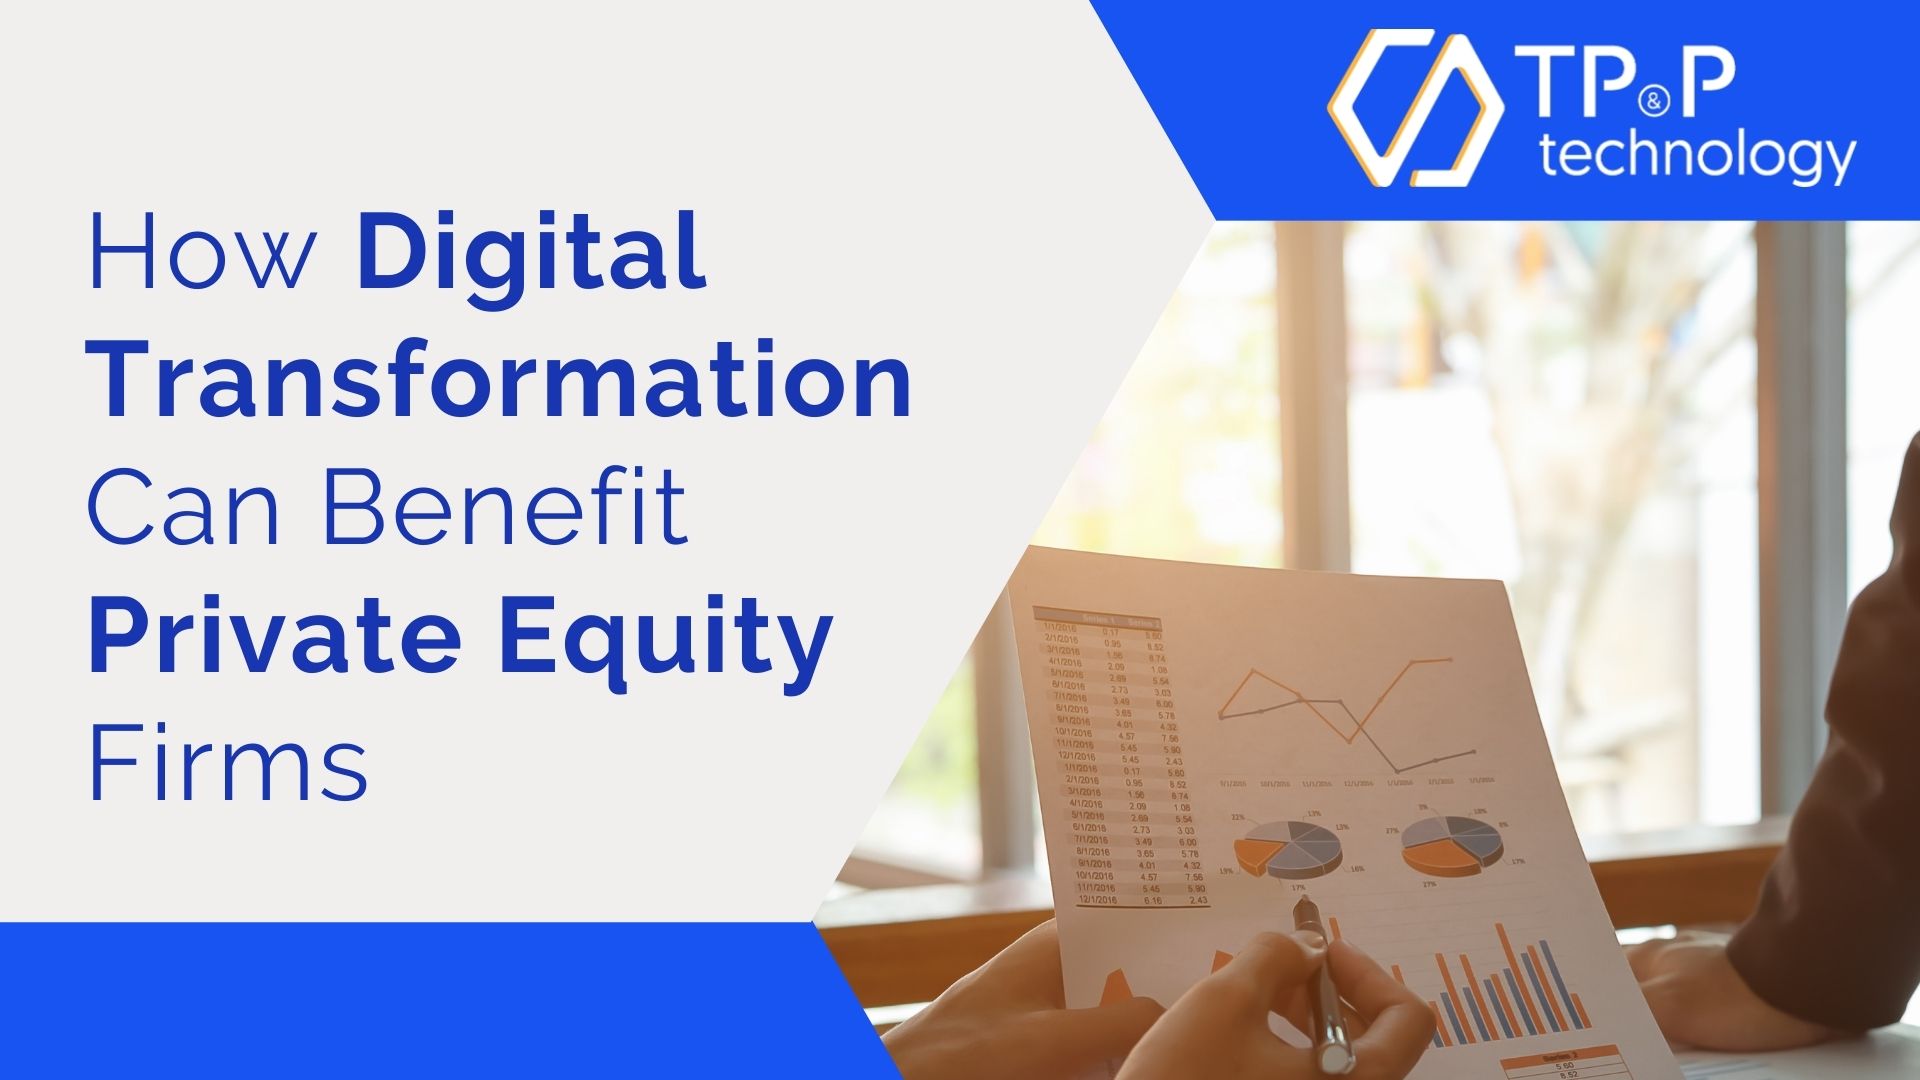 How Digital Transformation Can Benefit Private Equity Firms